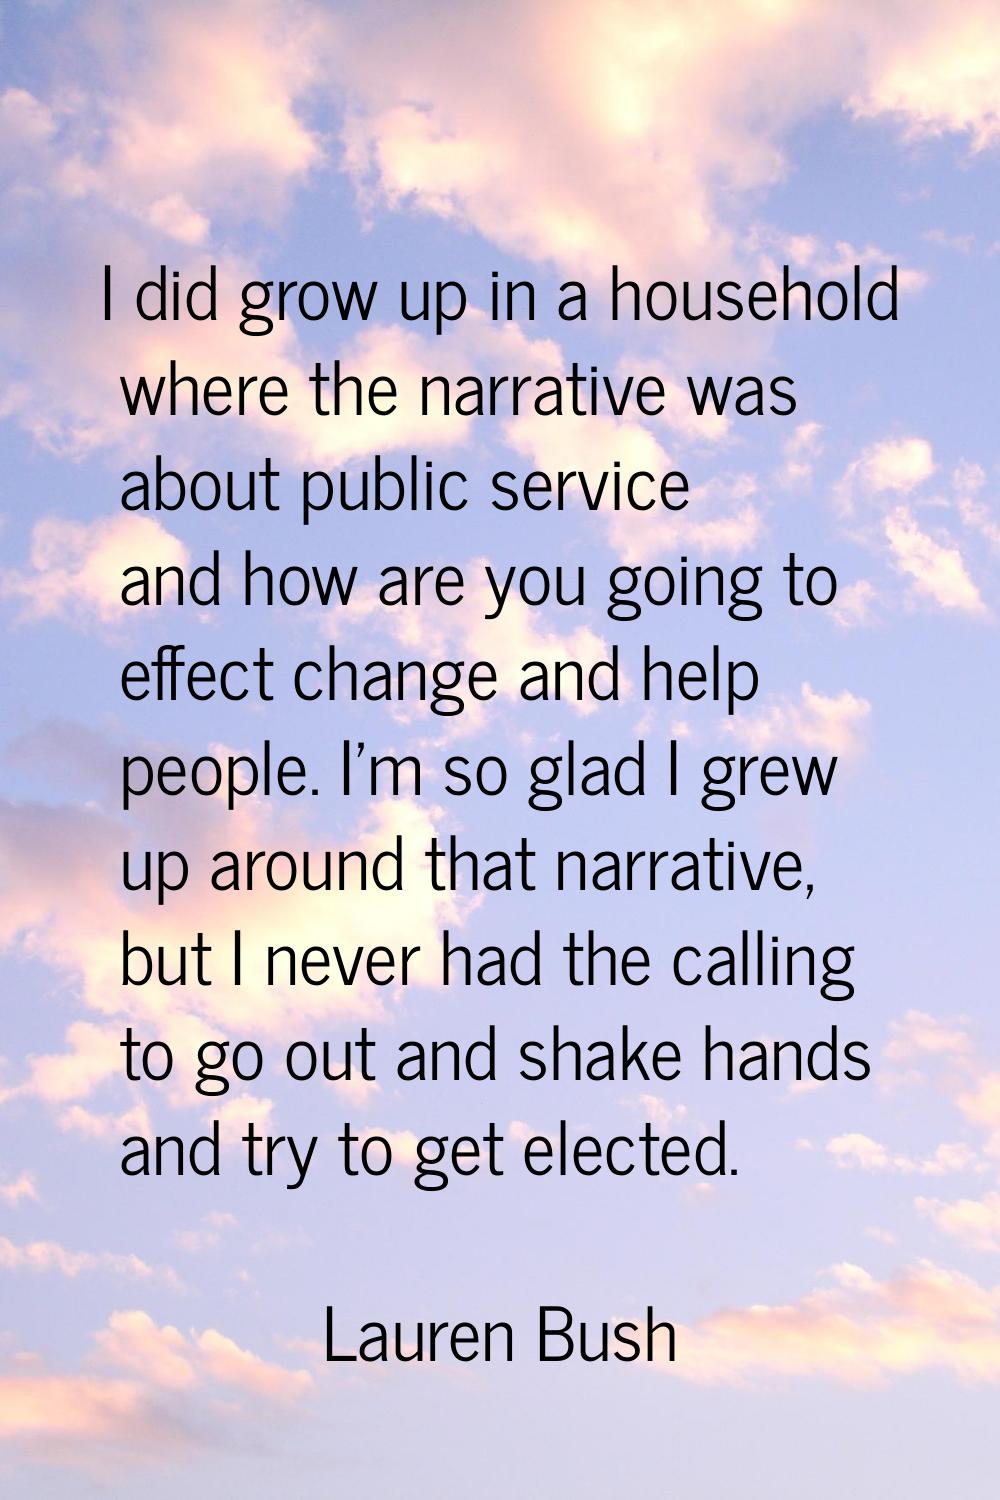 I did grow up in a household where the narrative was about public service and how are you going to 